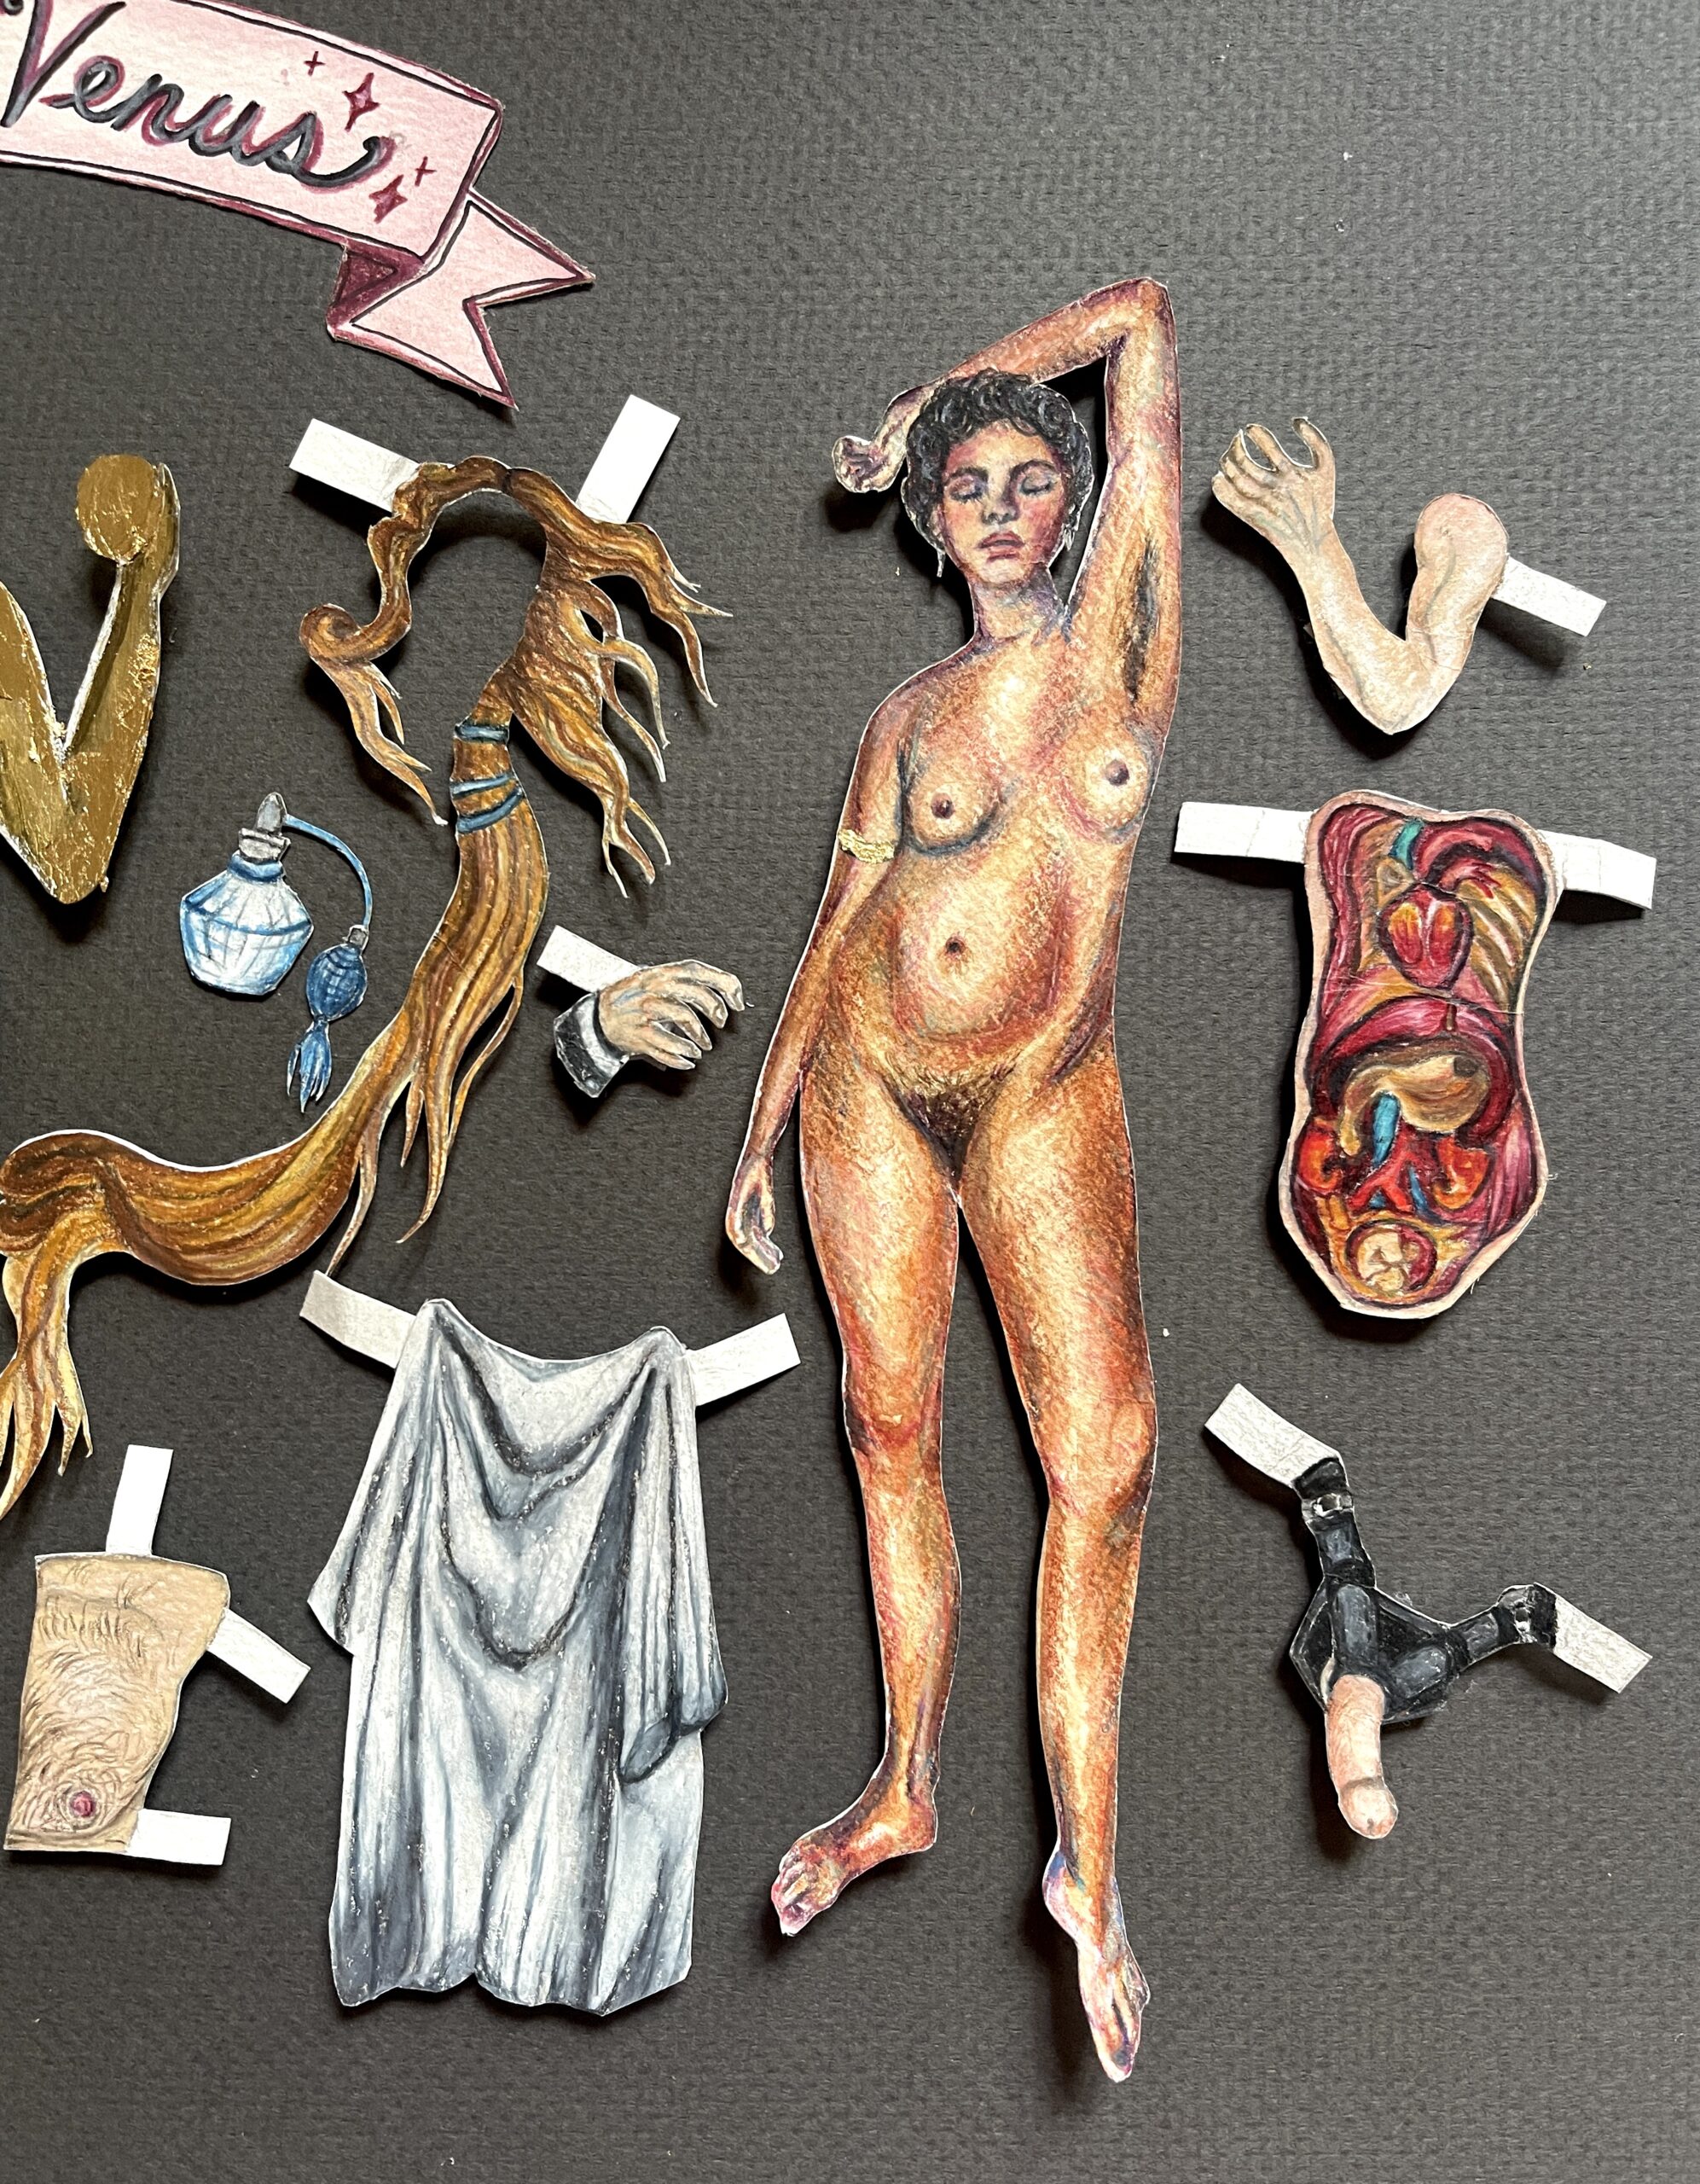 A woman poses naked with body parts surrounding her.